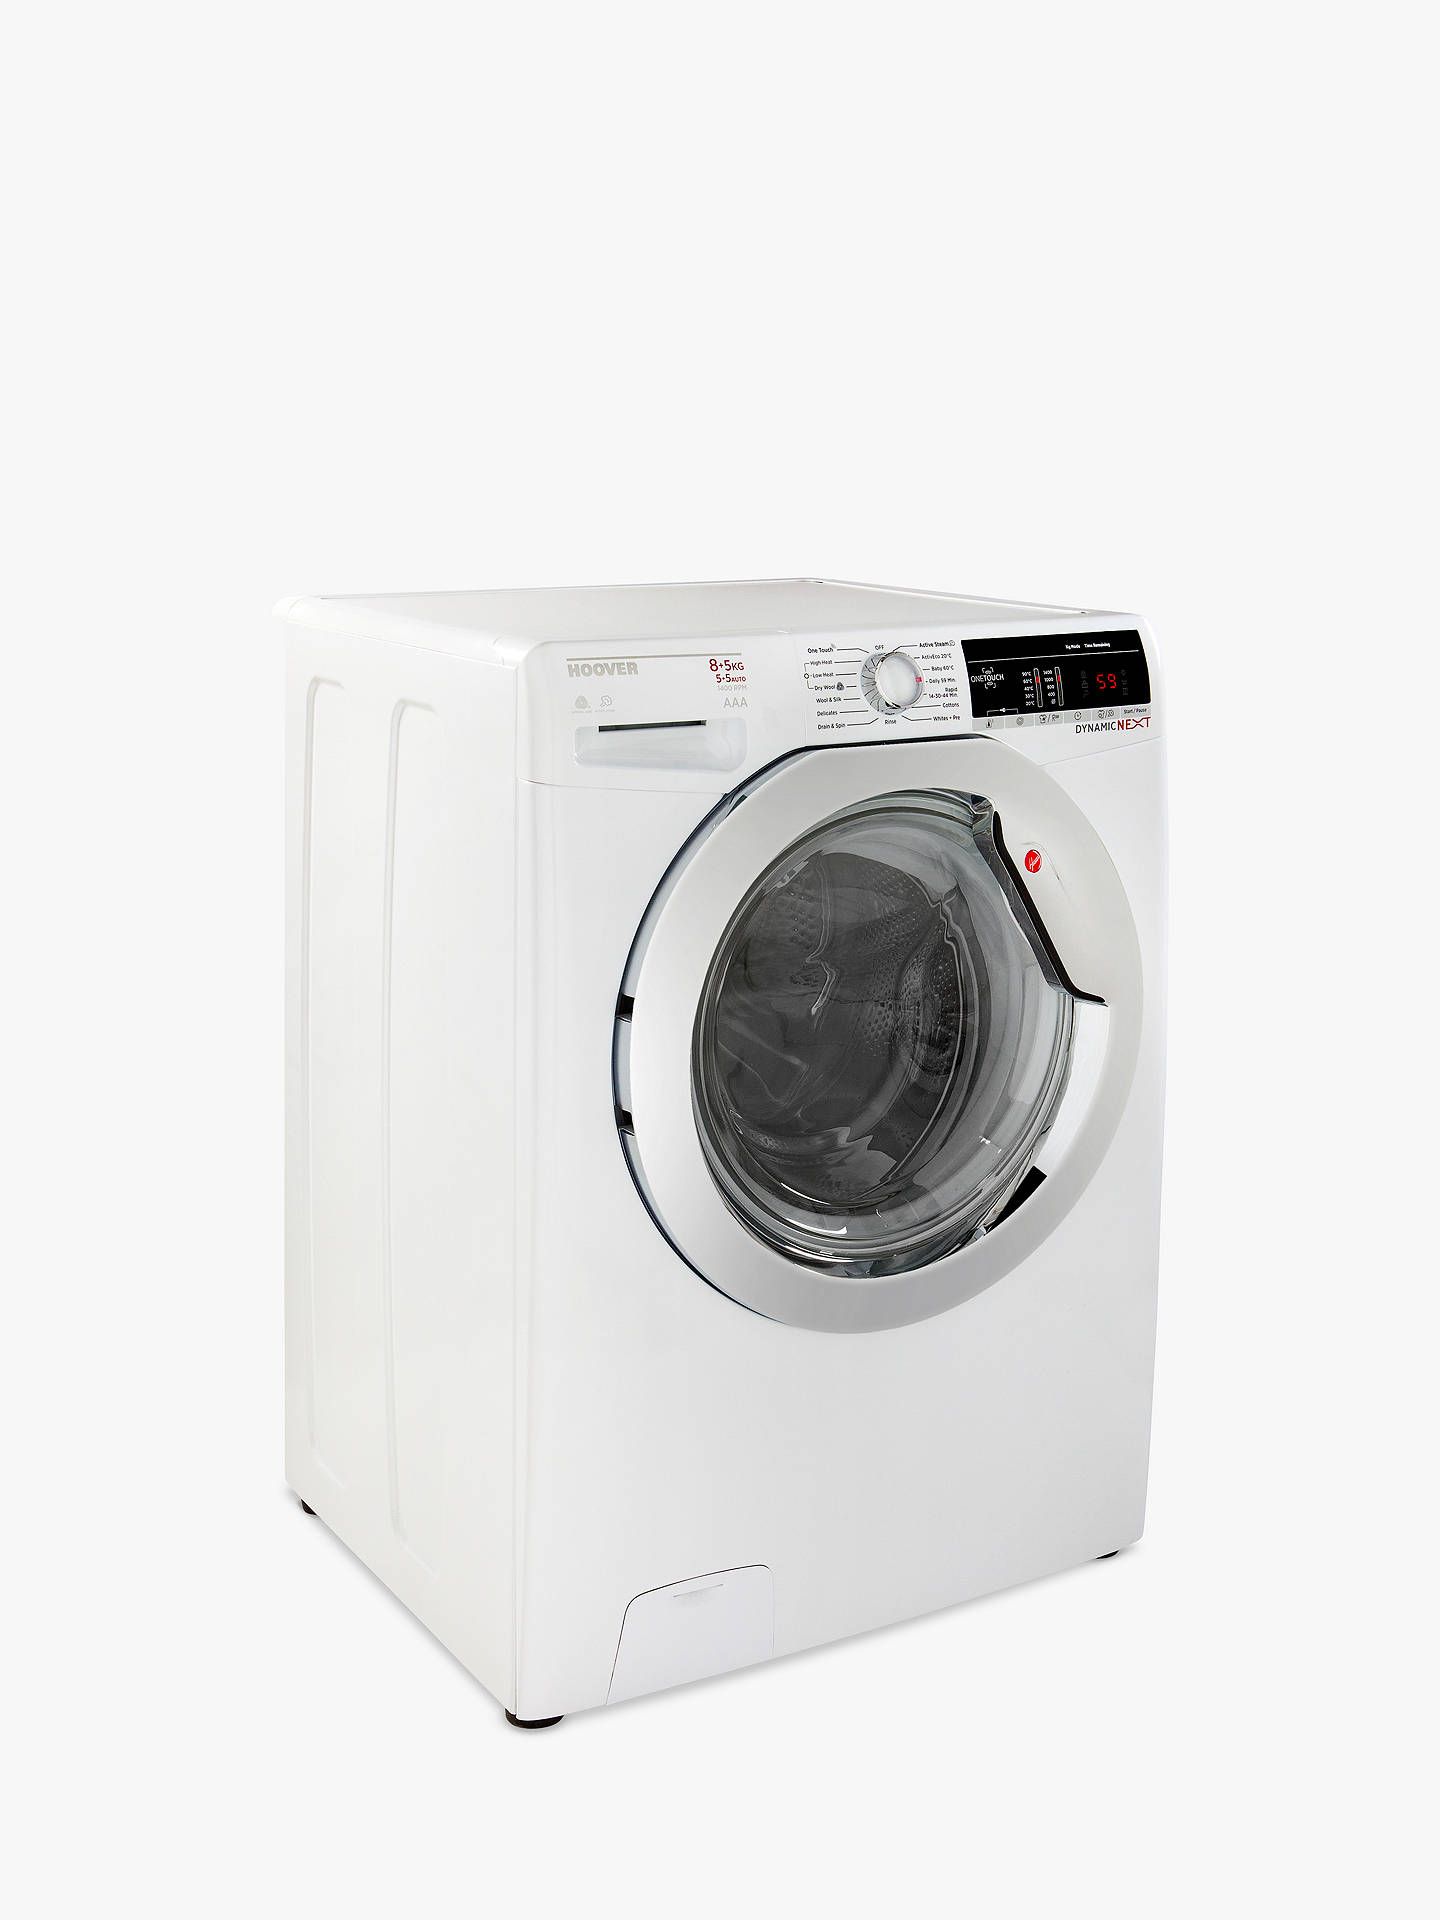 + VAT Grade A/B Hoover WDXOA485C 8kg/5kg 1400 Spin Washer Dryer - A Energy Rating - 13 Washing